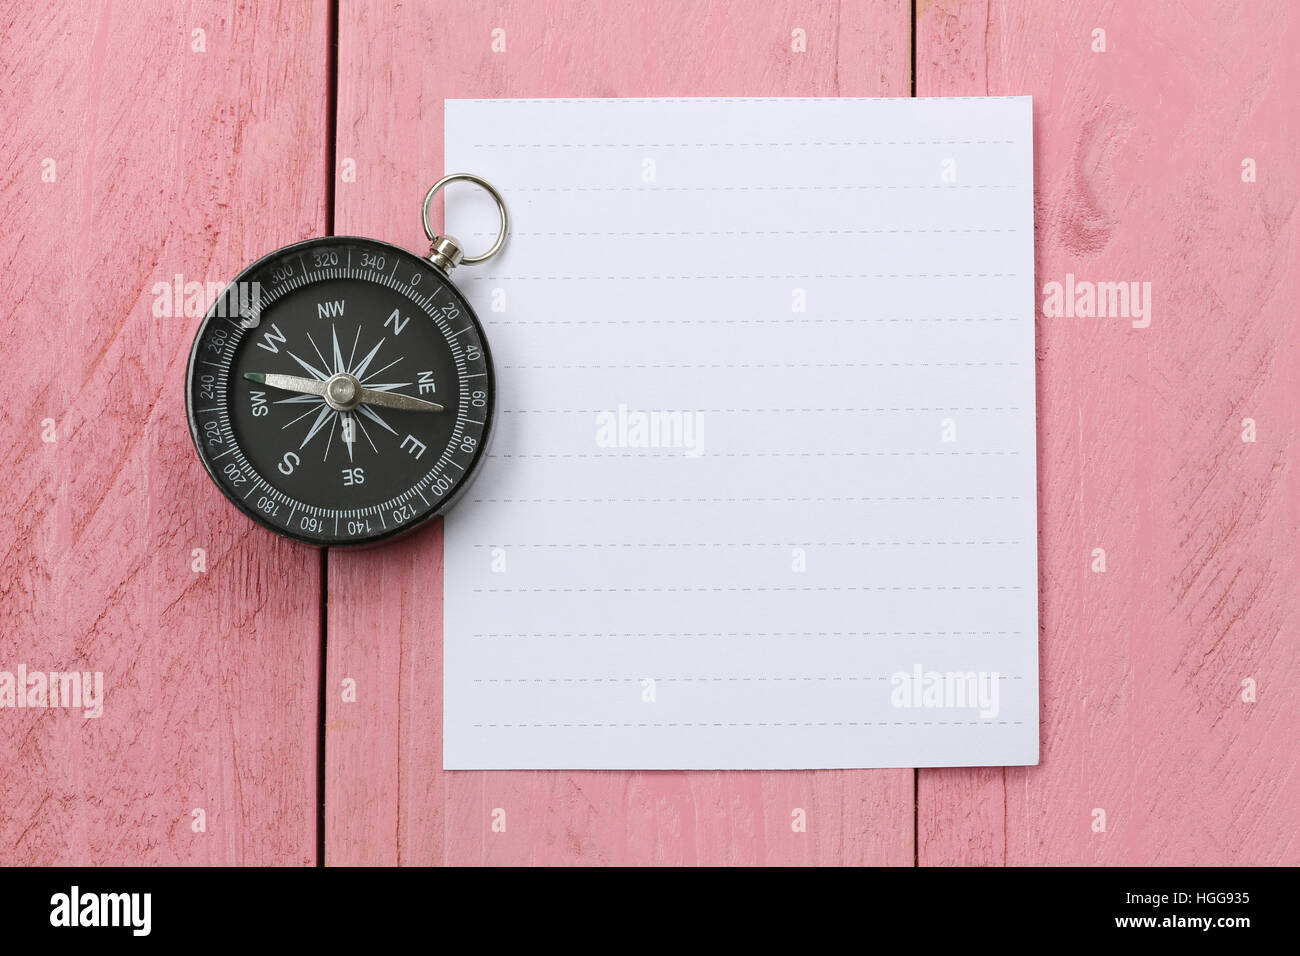 Compass and note paper on the pink wooden floor,concept of traveling and trekking. Stock Photo